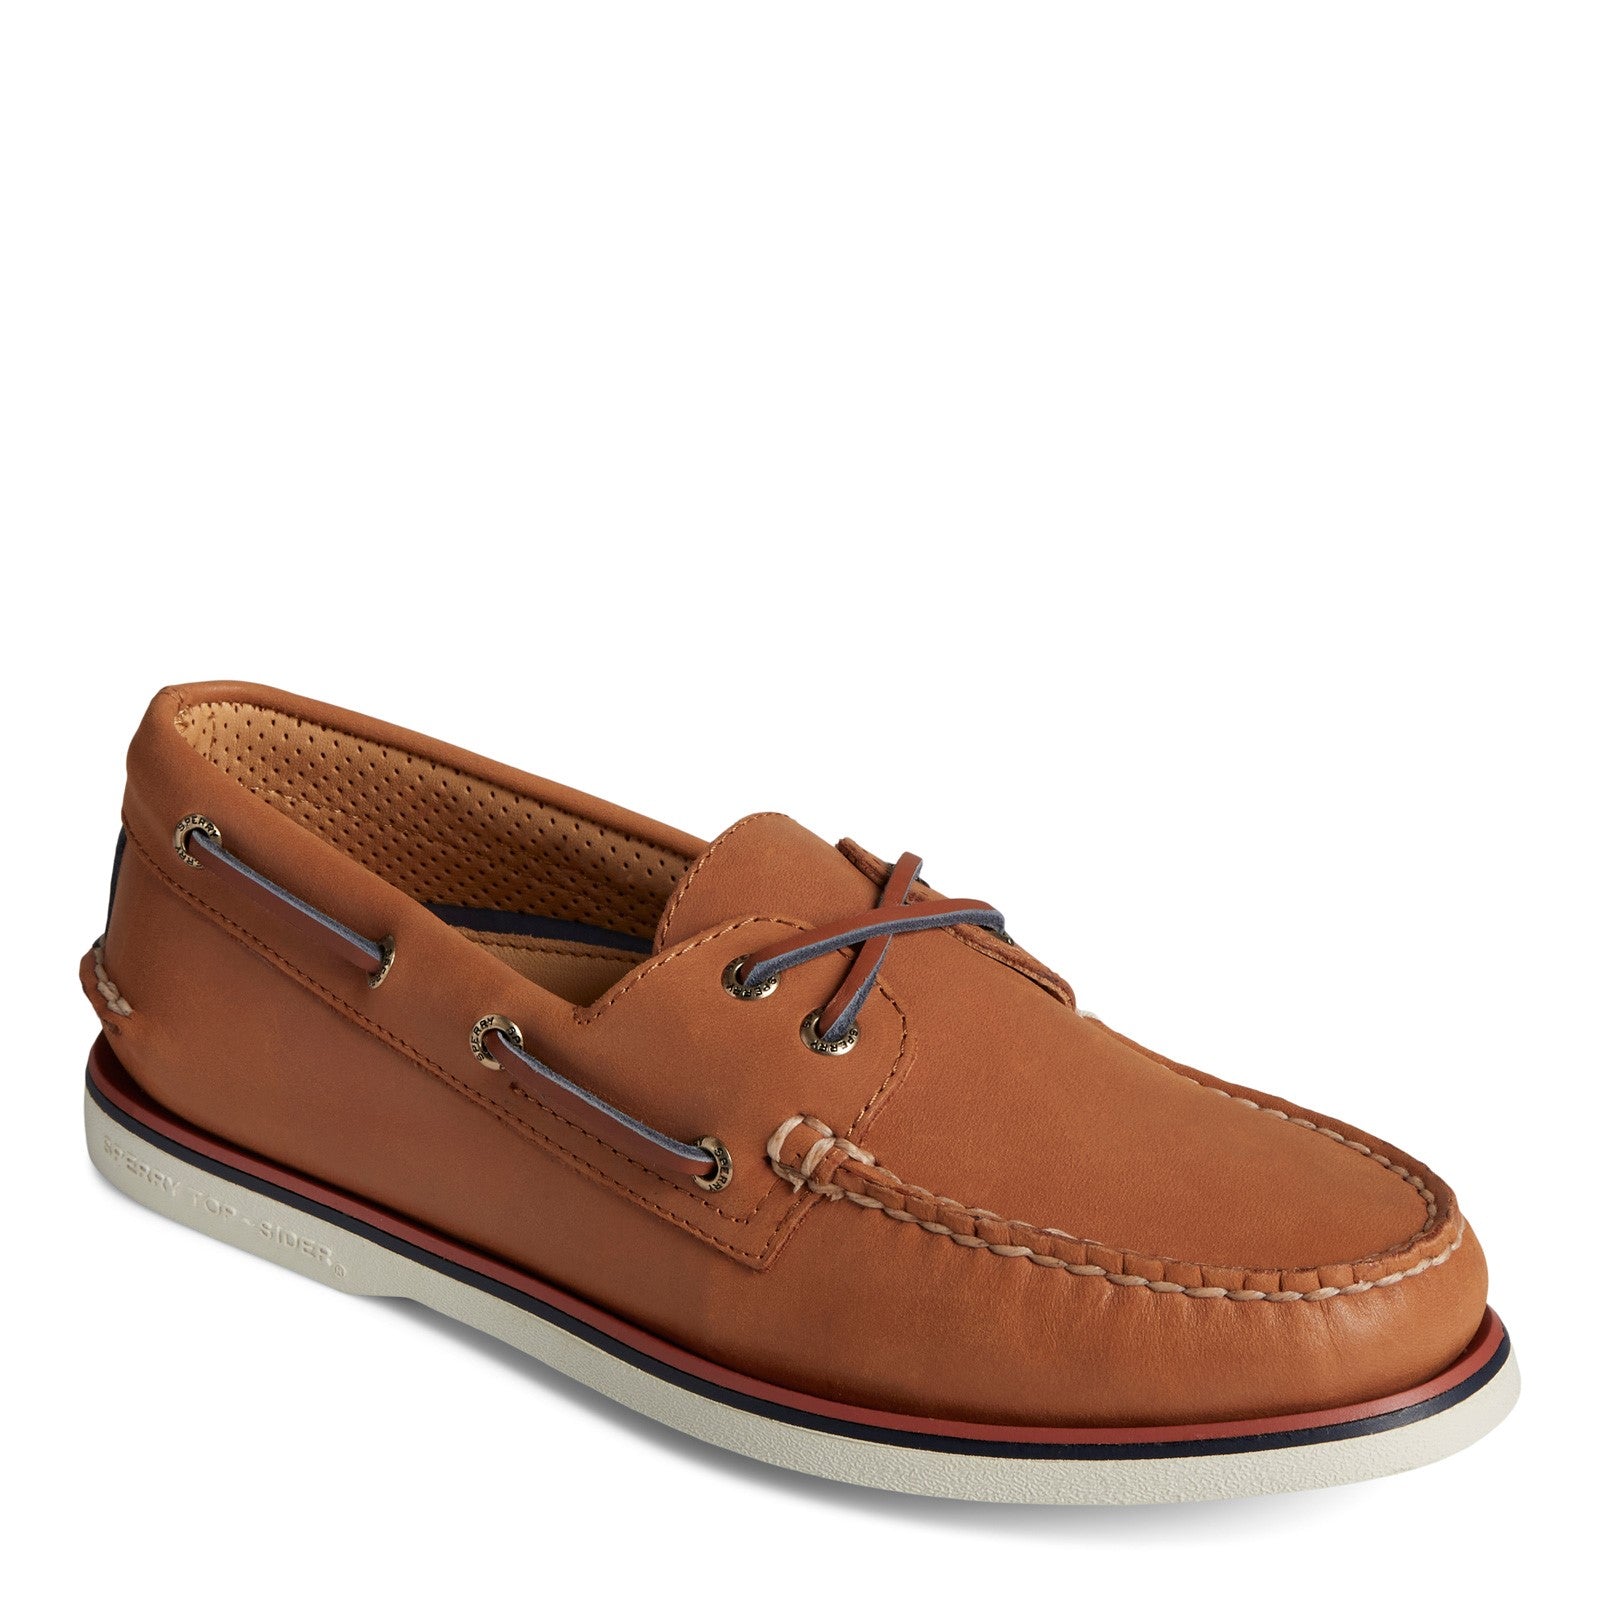 Hey Dude Wally Shoe - Men's Shoes in Giddy Up